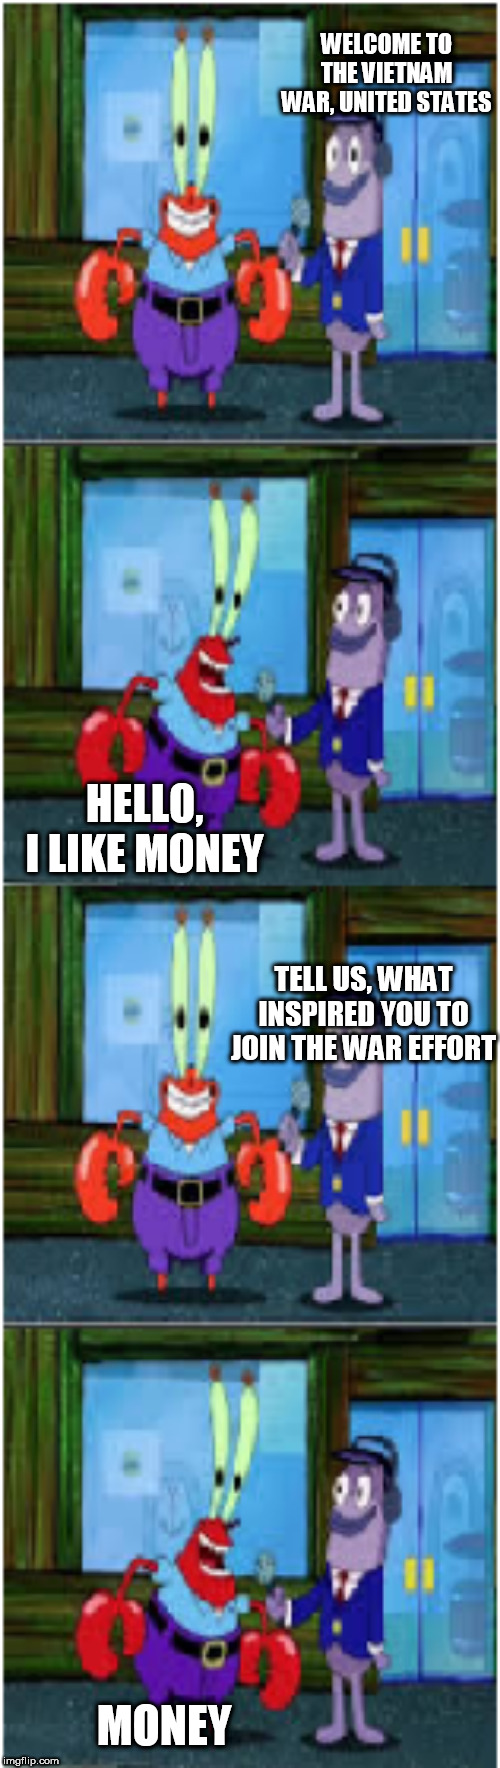 The Vietnam War In A Nutshell | WELCOME TO THE VIETNAM WAR, UNITED STATES; HELLO, I LIKE MONEY; TELL US, WHAT INSPIRED YOU TO JOIN THE WAR EFFORT; MONEY | image tagged in mr krabs money extended,vietnam,war,vietnam war,the vietnam war,money | made w/ Imgflip meme maker